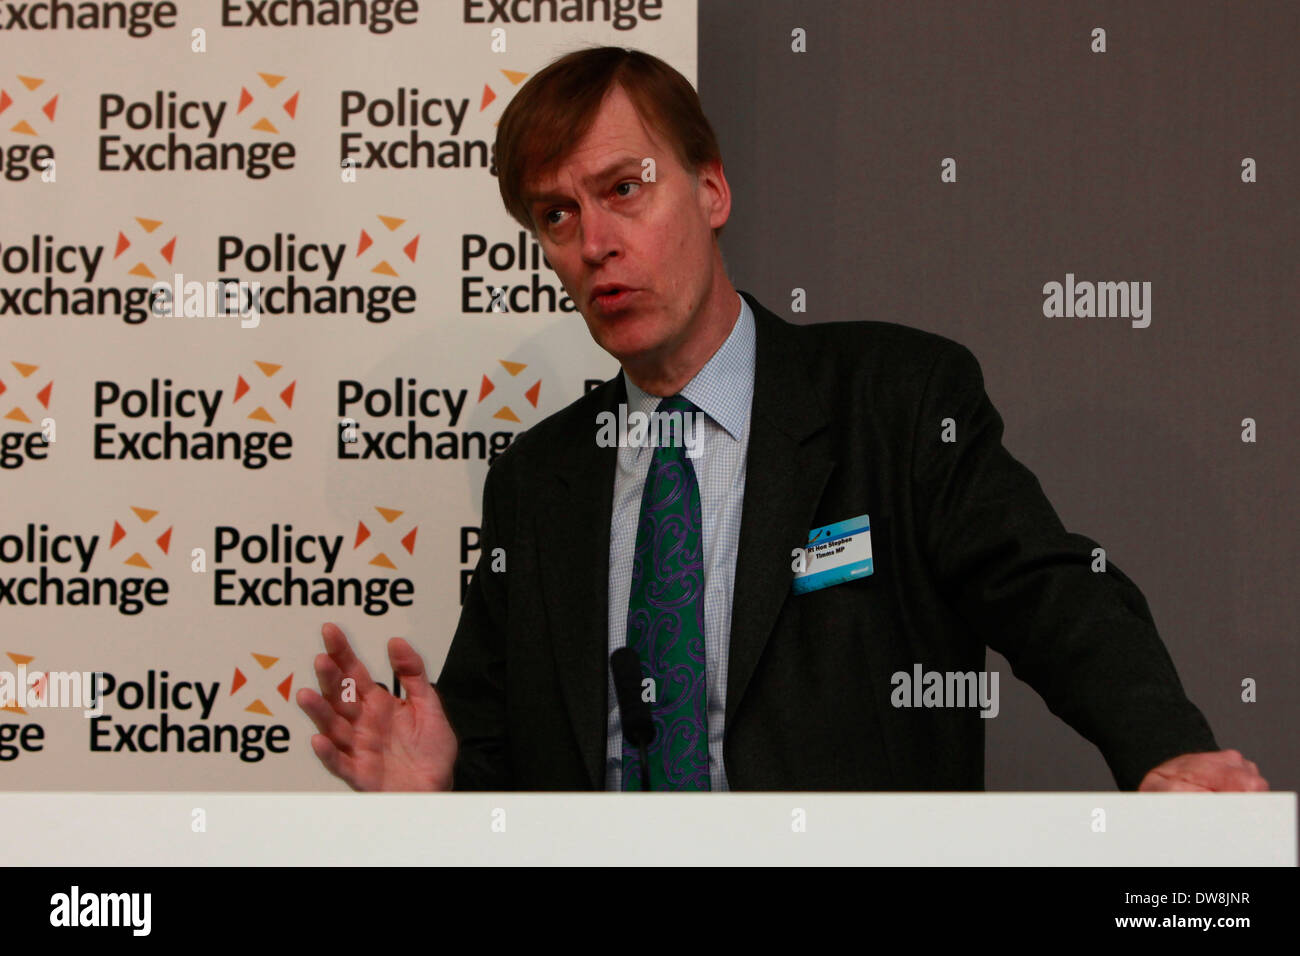 Rt Hon Stephen Timms MP, Shadow Minister for Employment is seen during the Policy Exchange conference in central London 18 April 2012, Policy Exchange is hosting a major full day conference looking at the future of the labour market and welfare and skills policy in the UK. Stock Photo